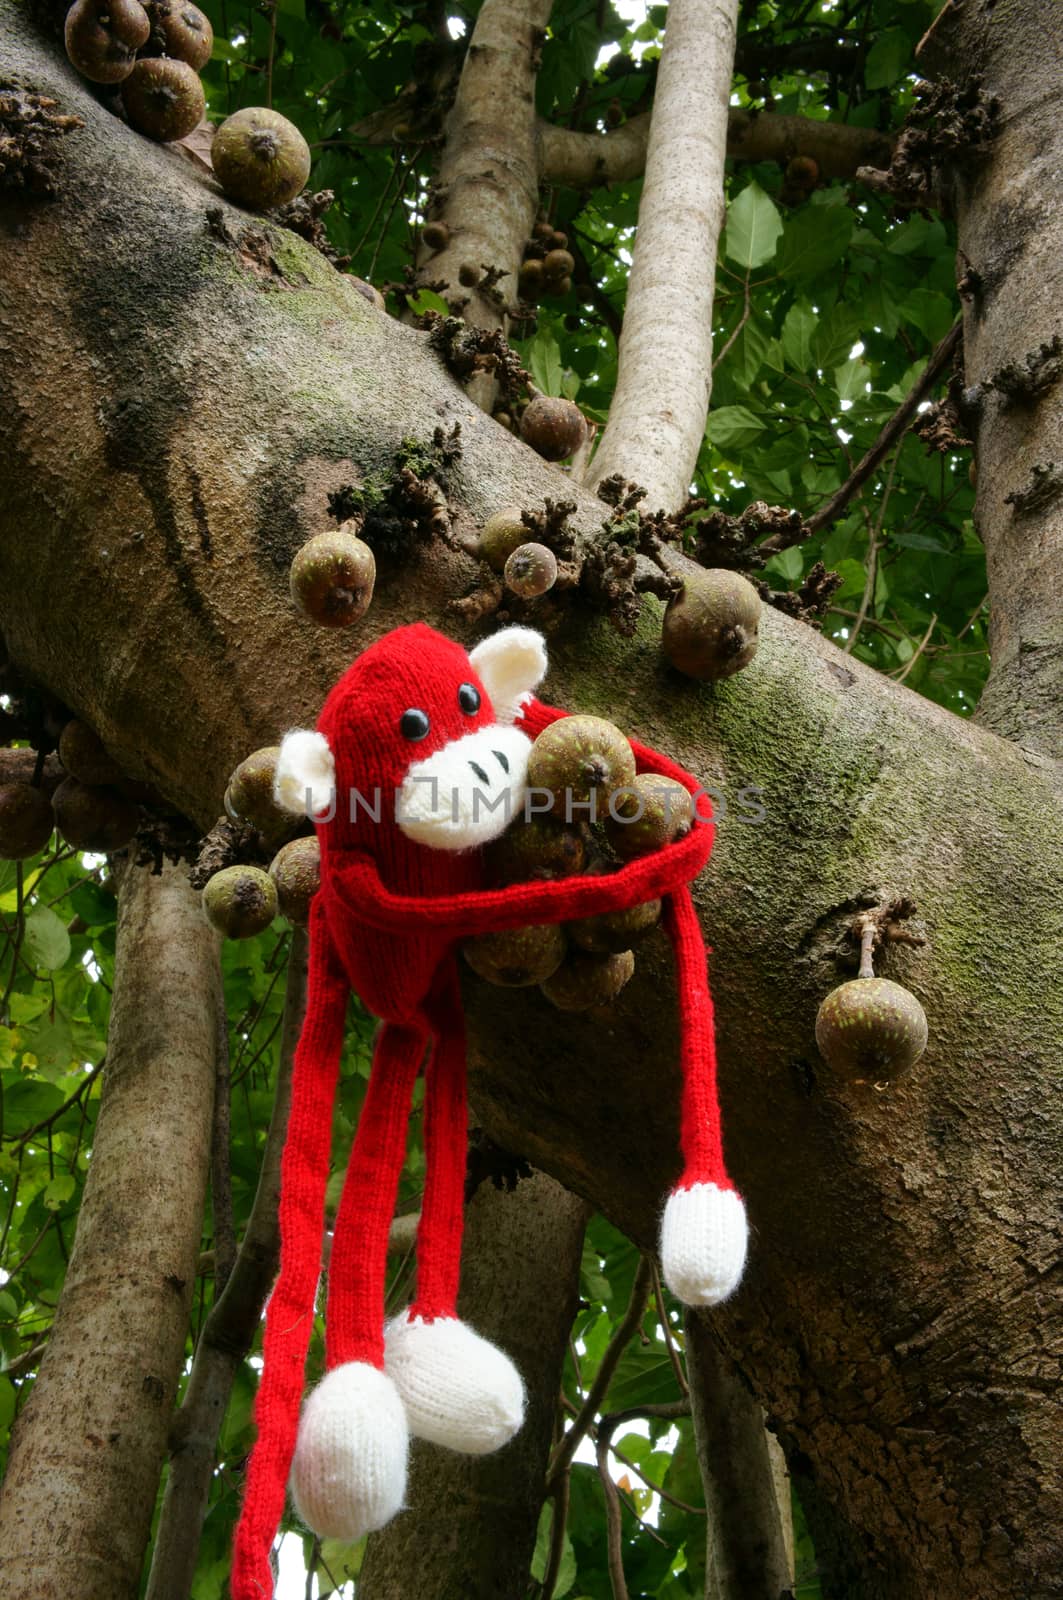 knitted monkey, symbol 2016, year of the monkey by xuanhuongho